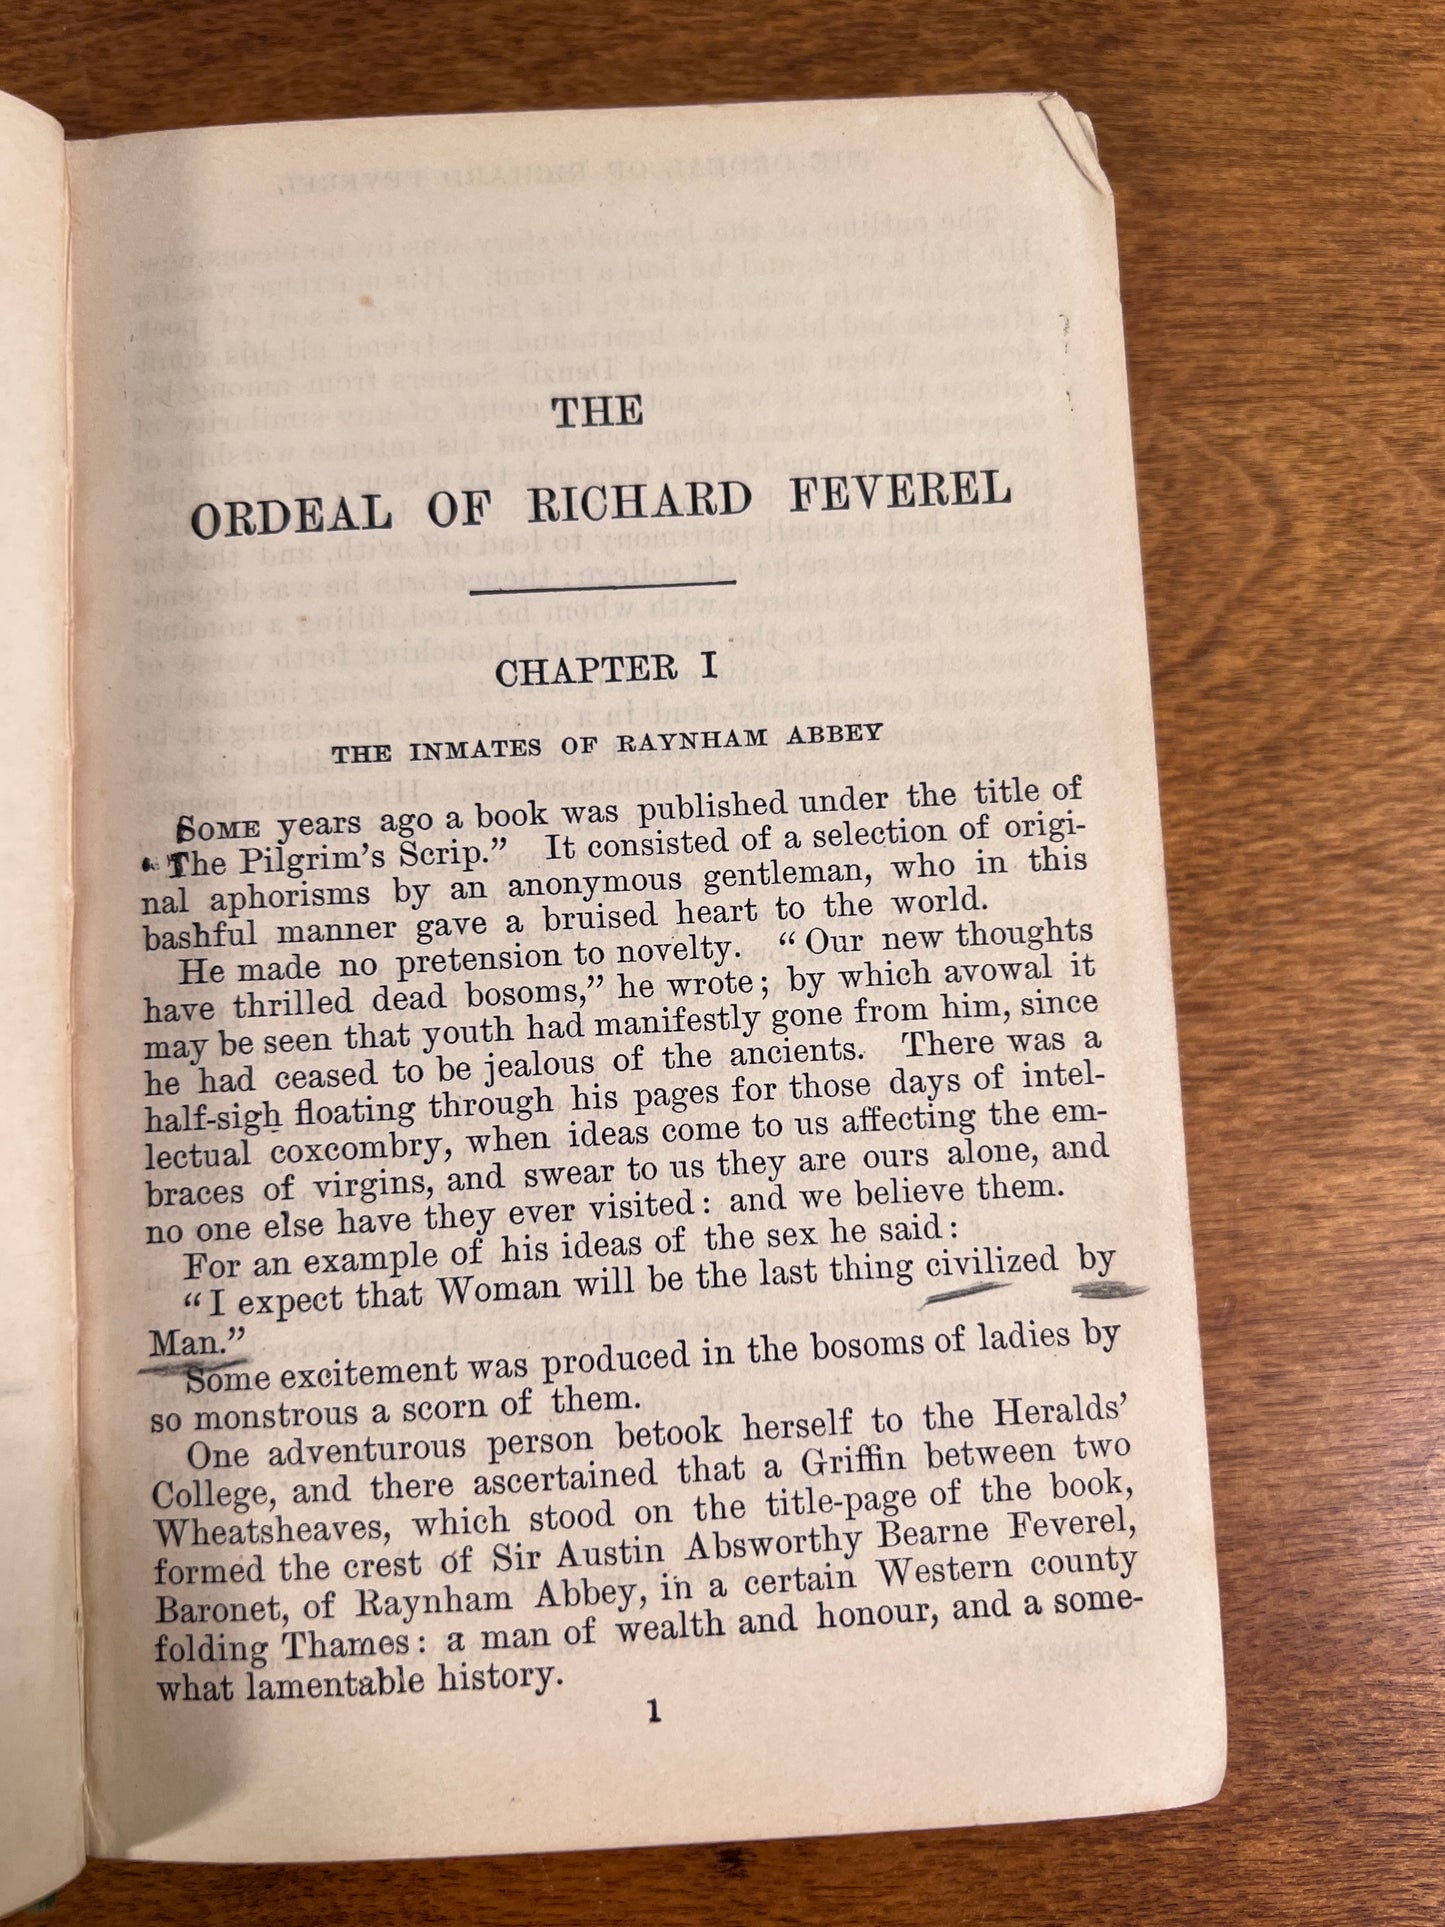 The Ordeal of Richard Feverel by George Meredith, 1912